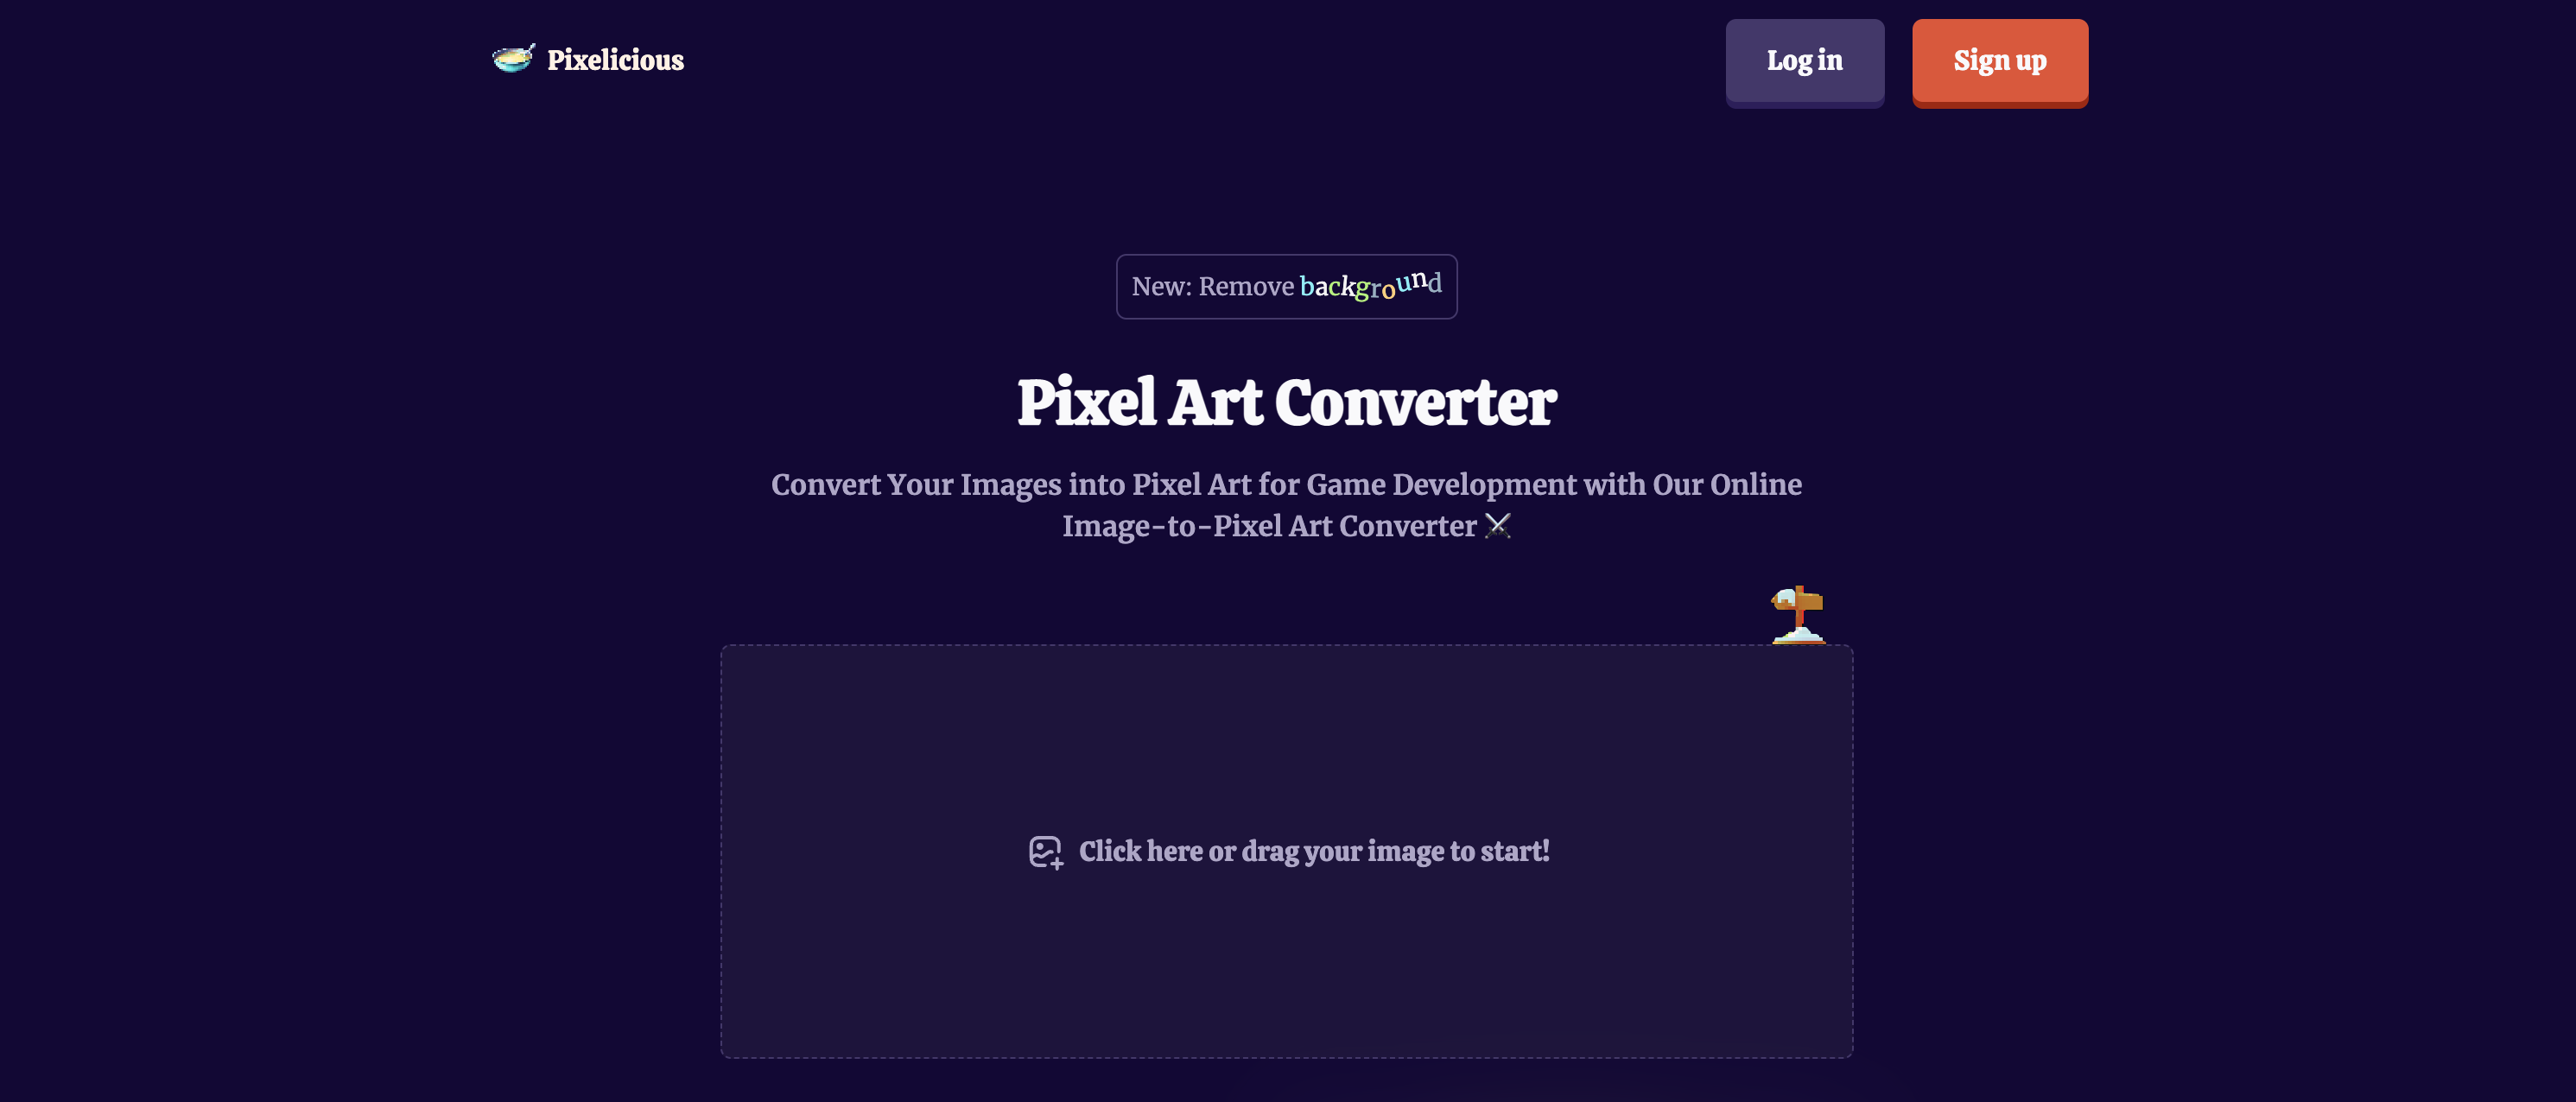 Pixelicious.xyz: Transforming Your Images into Pixel Art for Game Development